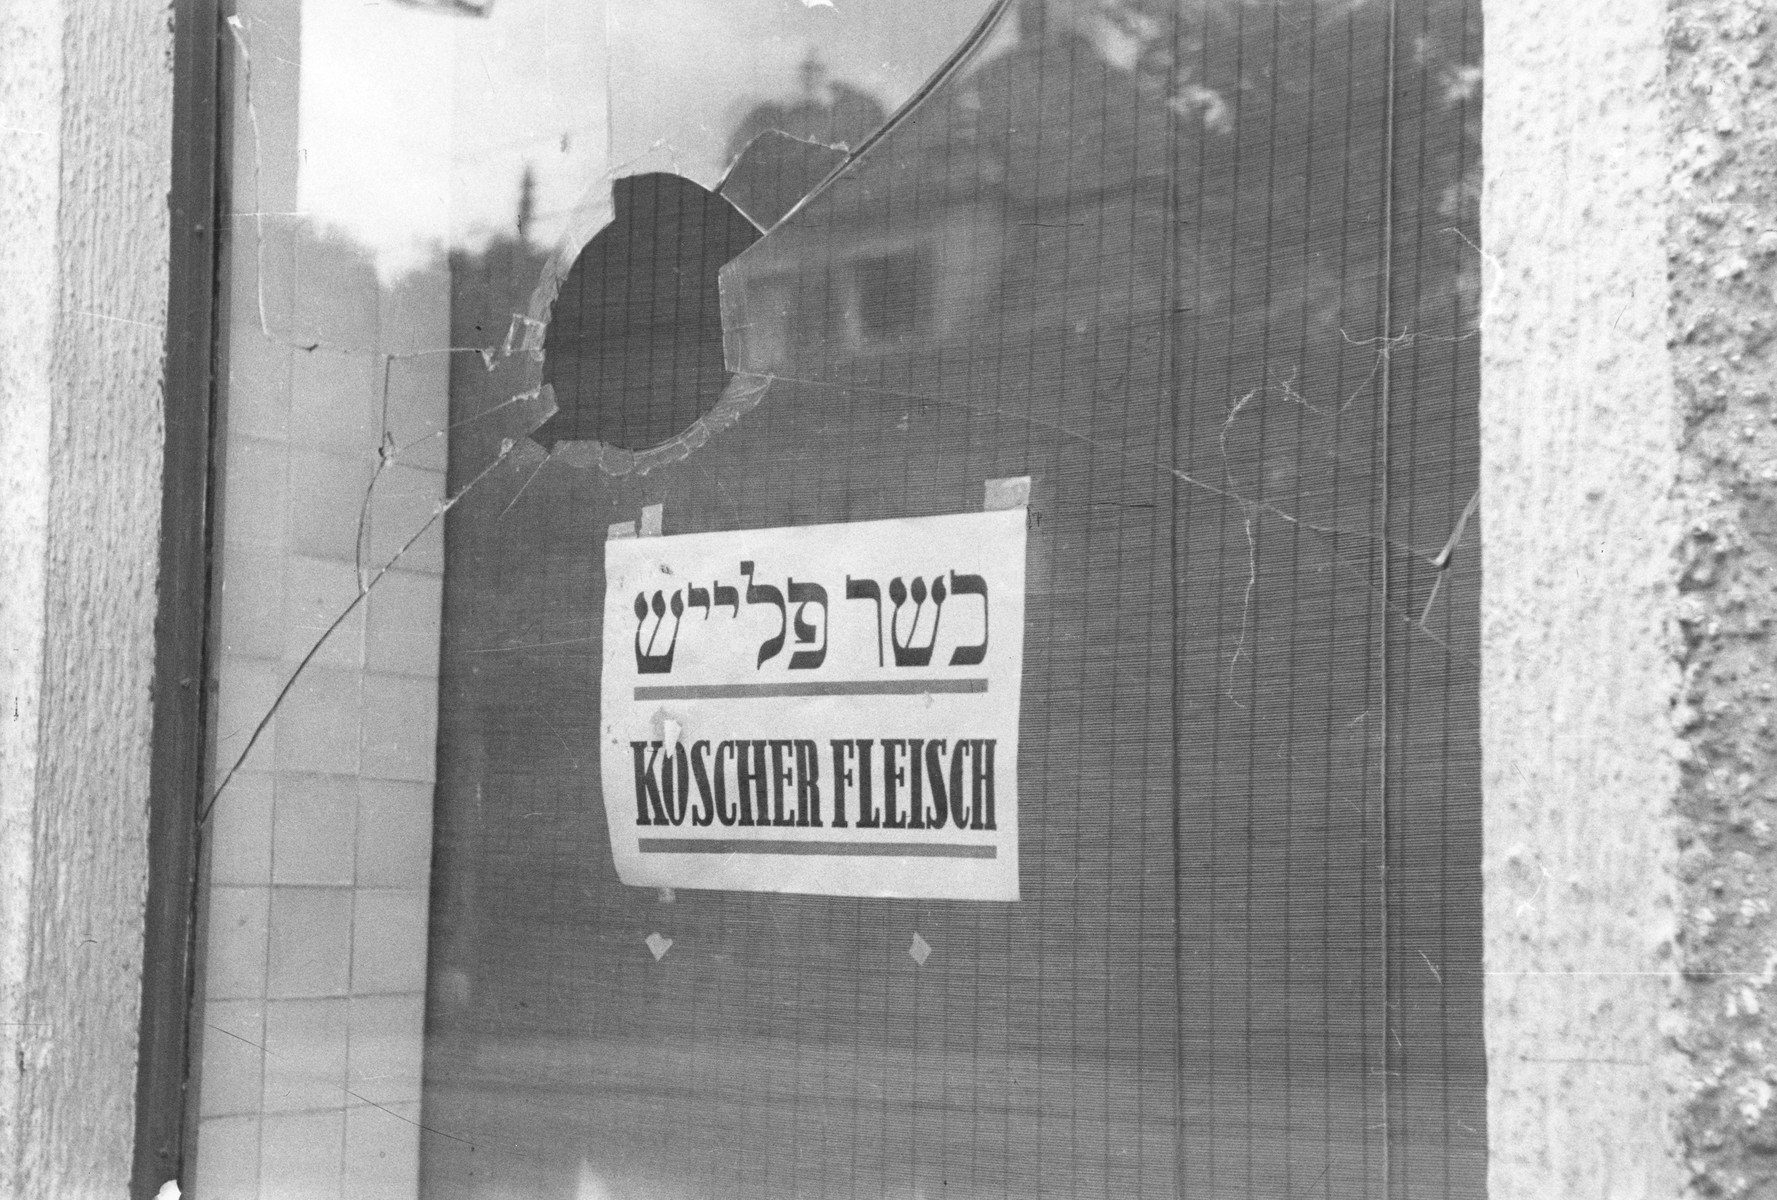 The vandalized display window of a kosher butcher shop located on the Ismaningerstrasse in Munich.